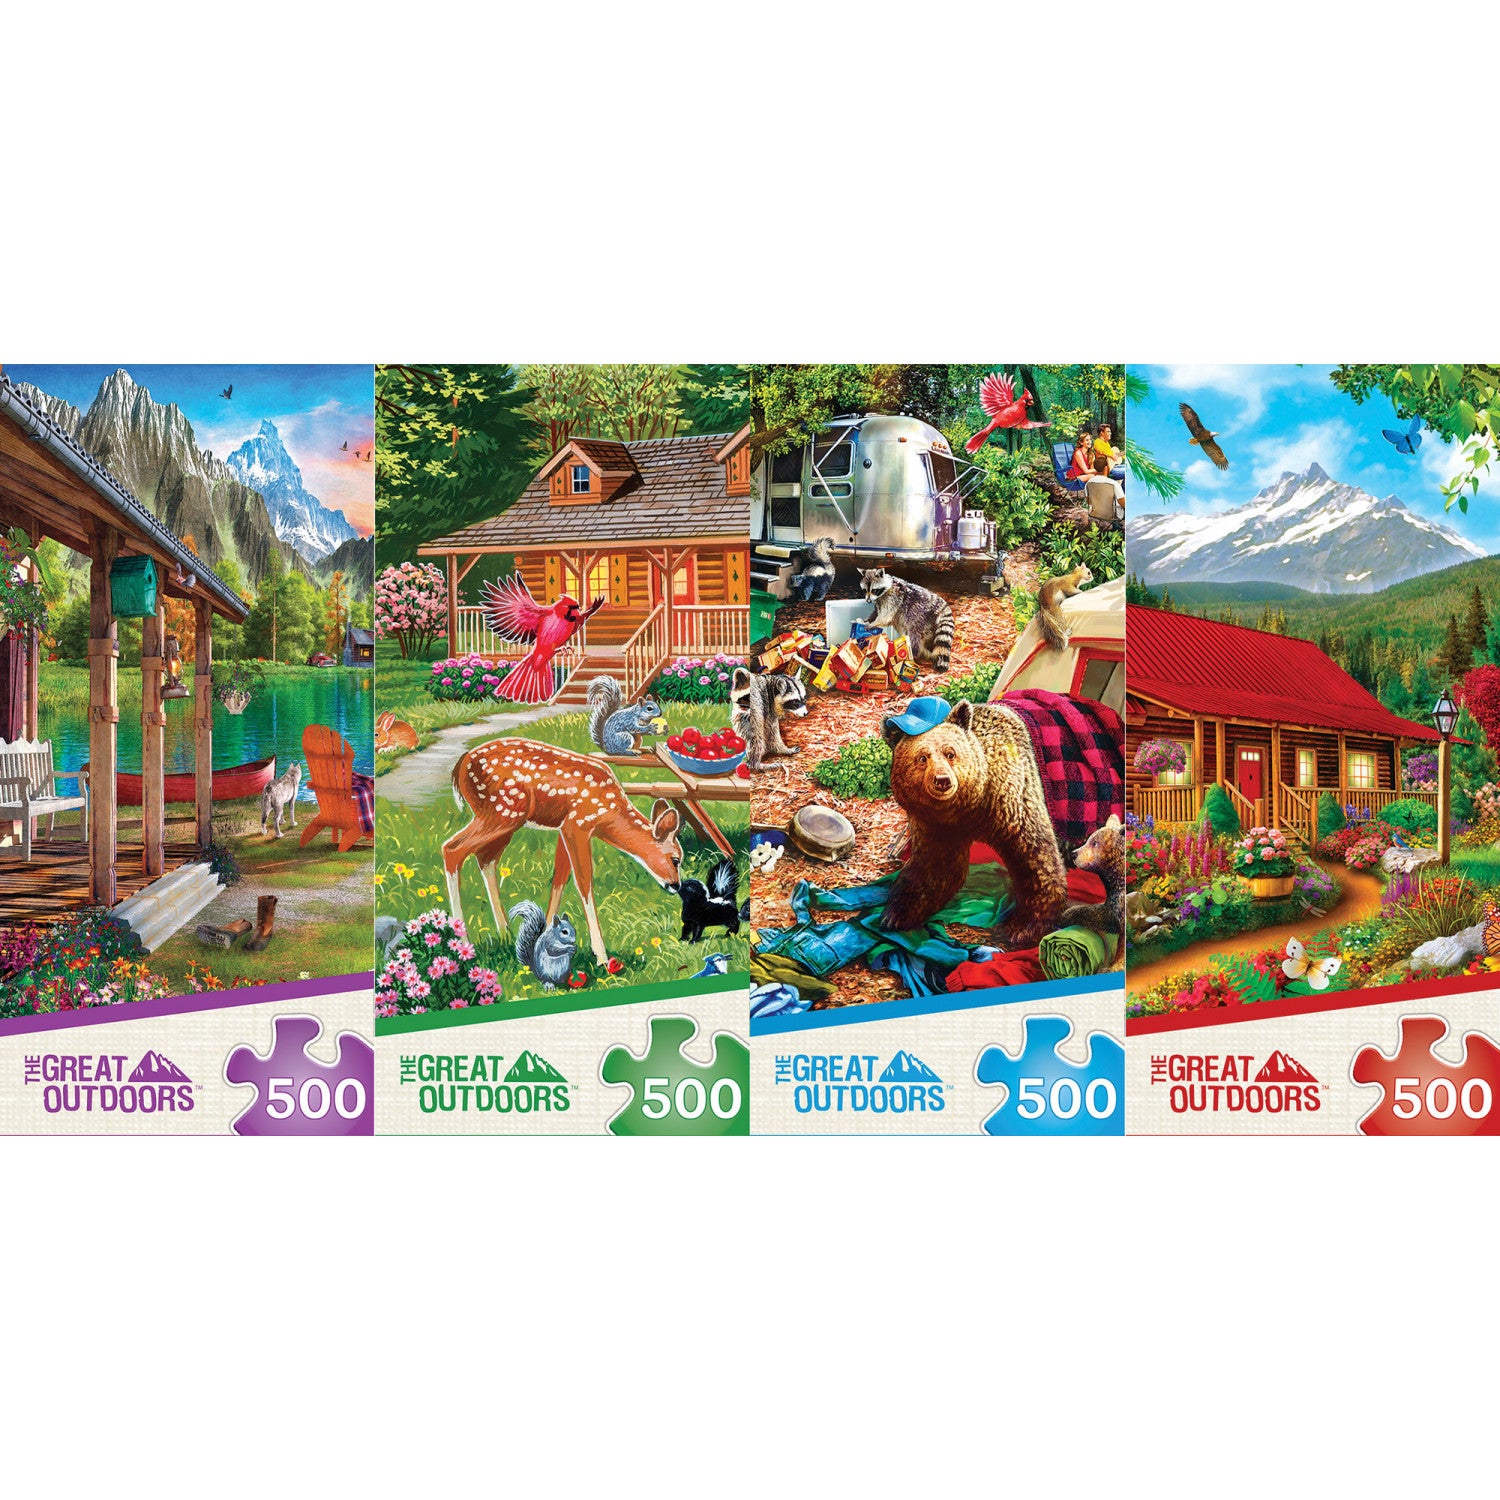 Masterpieces 4 Pack Assortment - The Great Outdoors Puzzles (4 - 500 Piece)